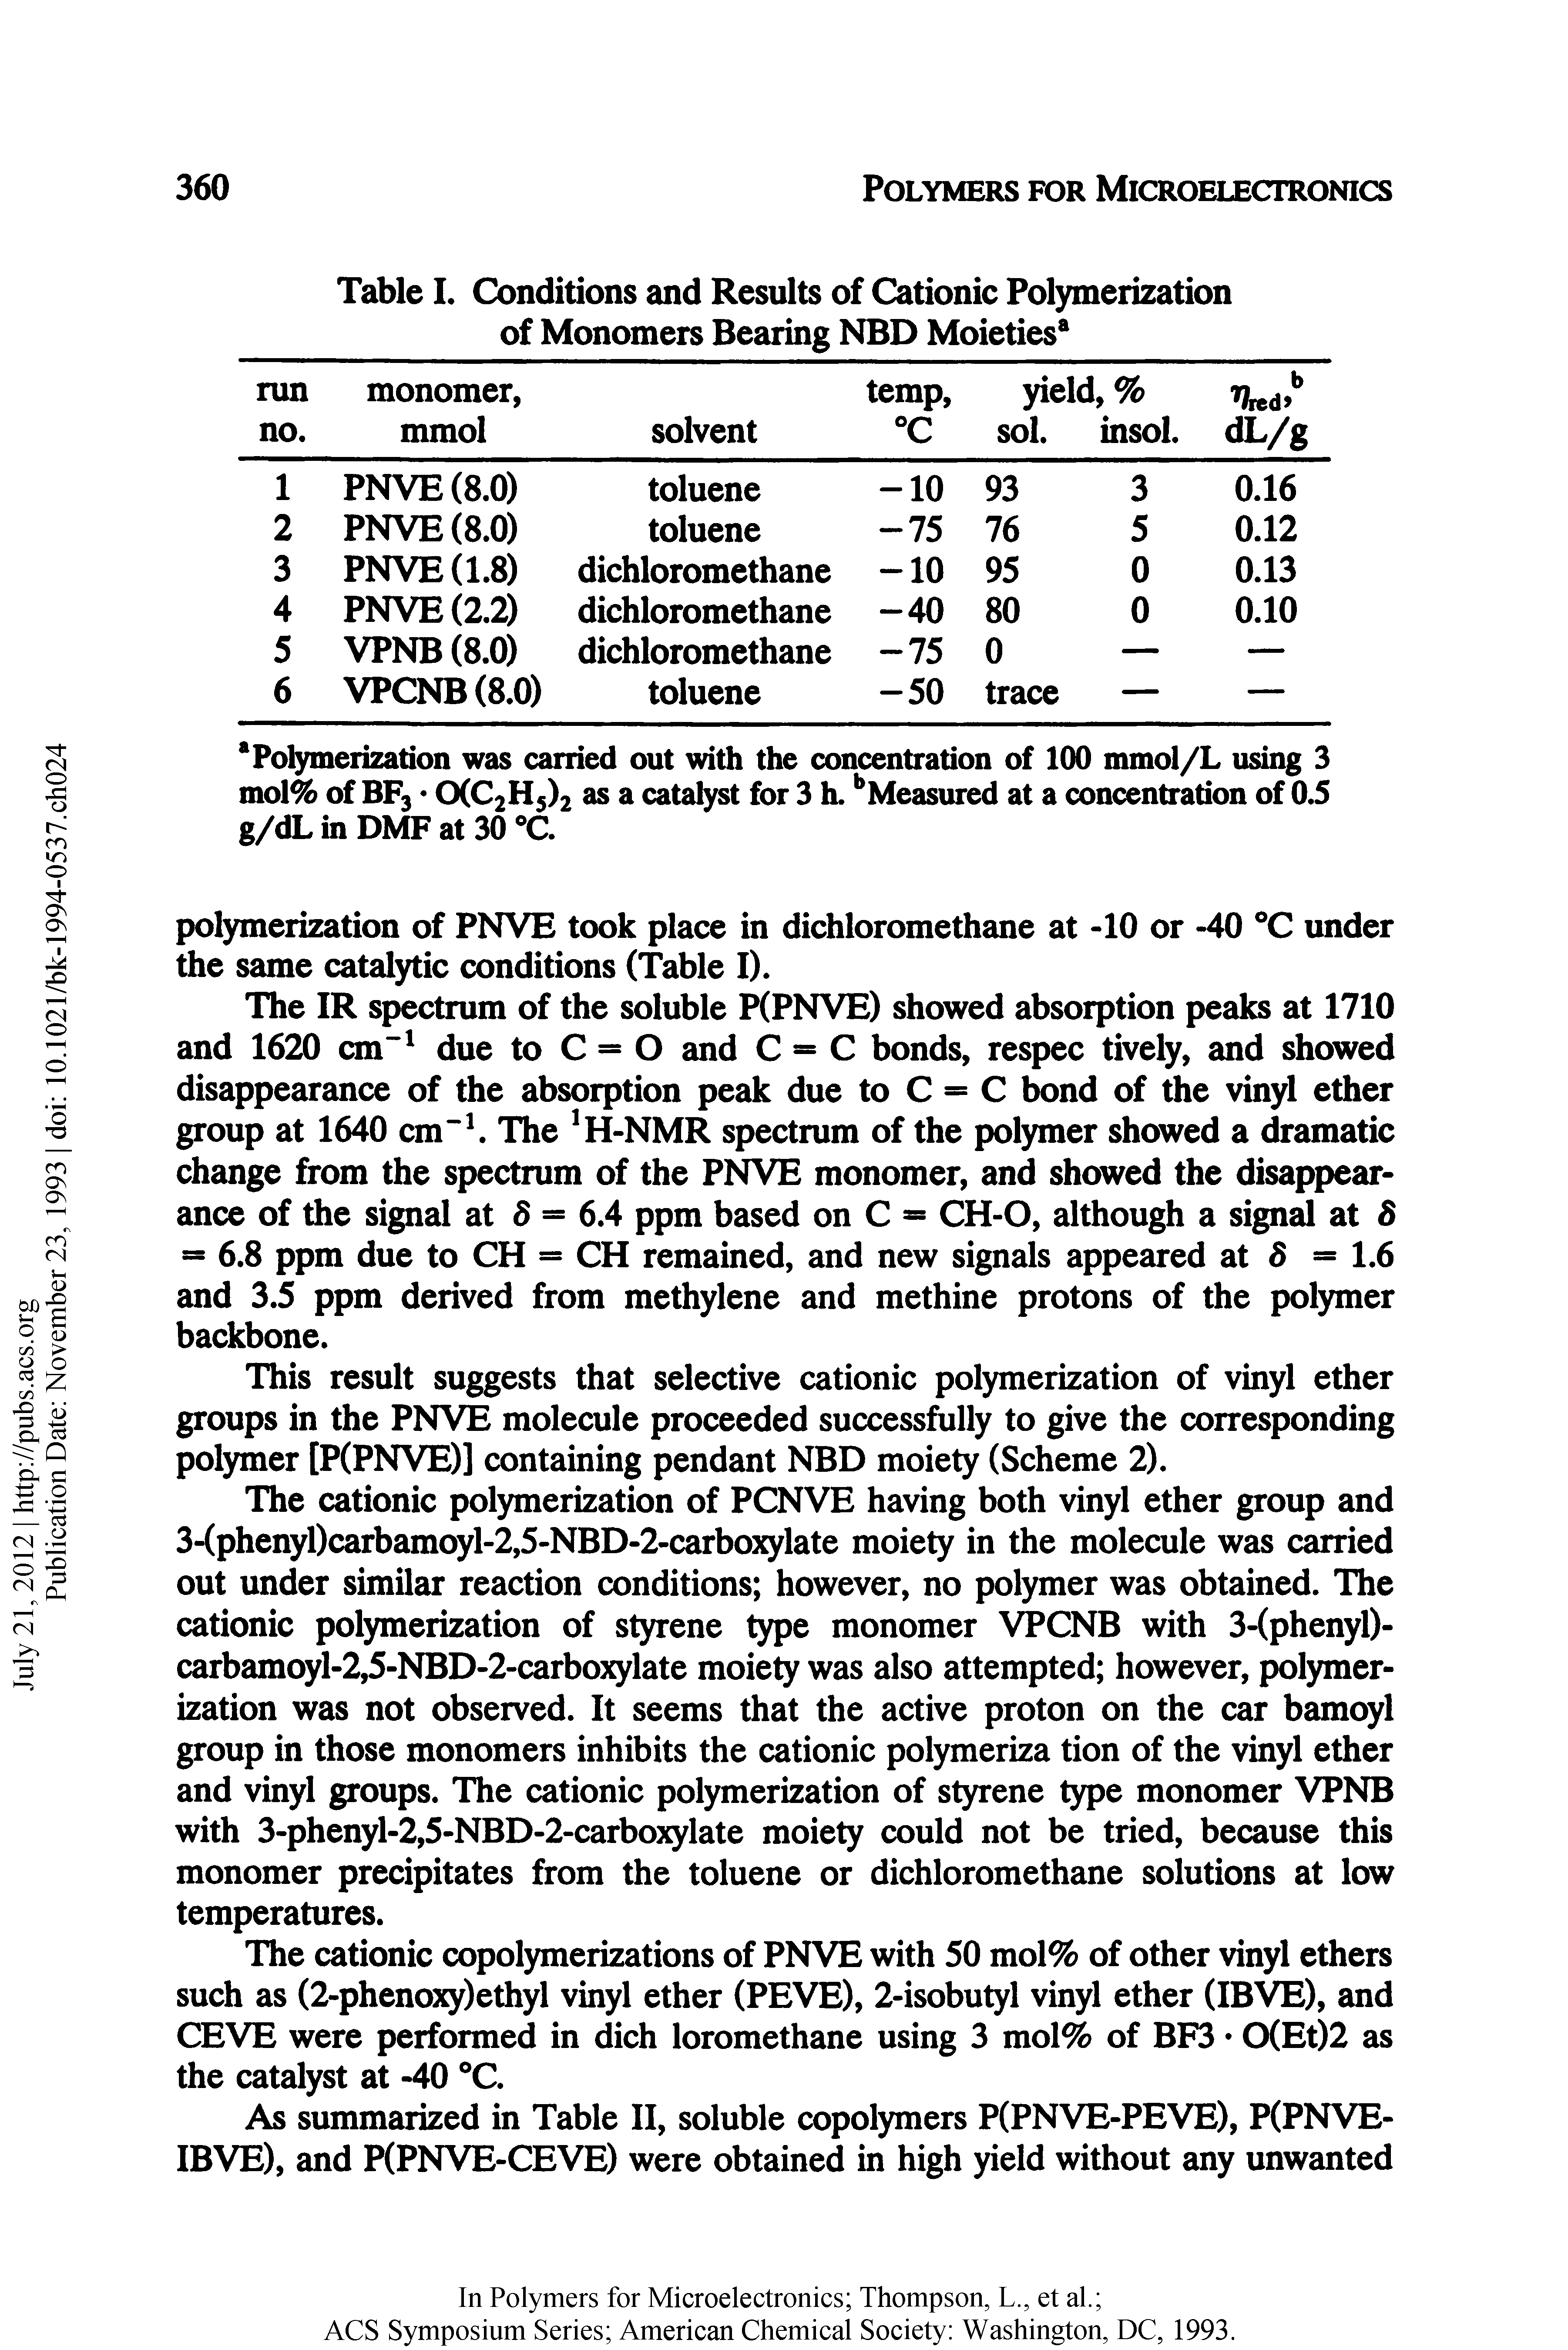 Table I. Conditions and Results of Cationic Polymerization of Monomers Bearing NBD Moieties ...